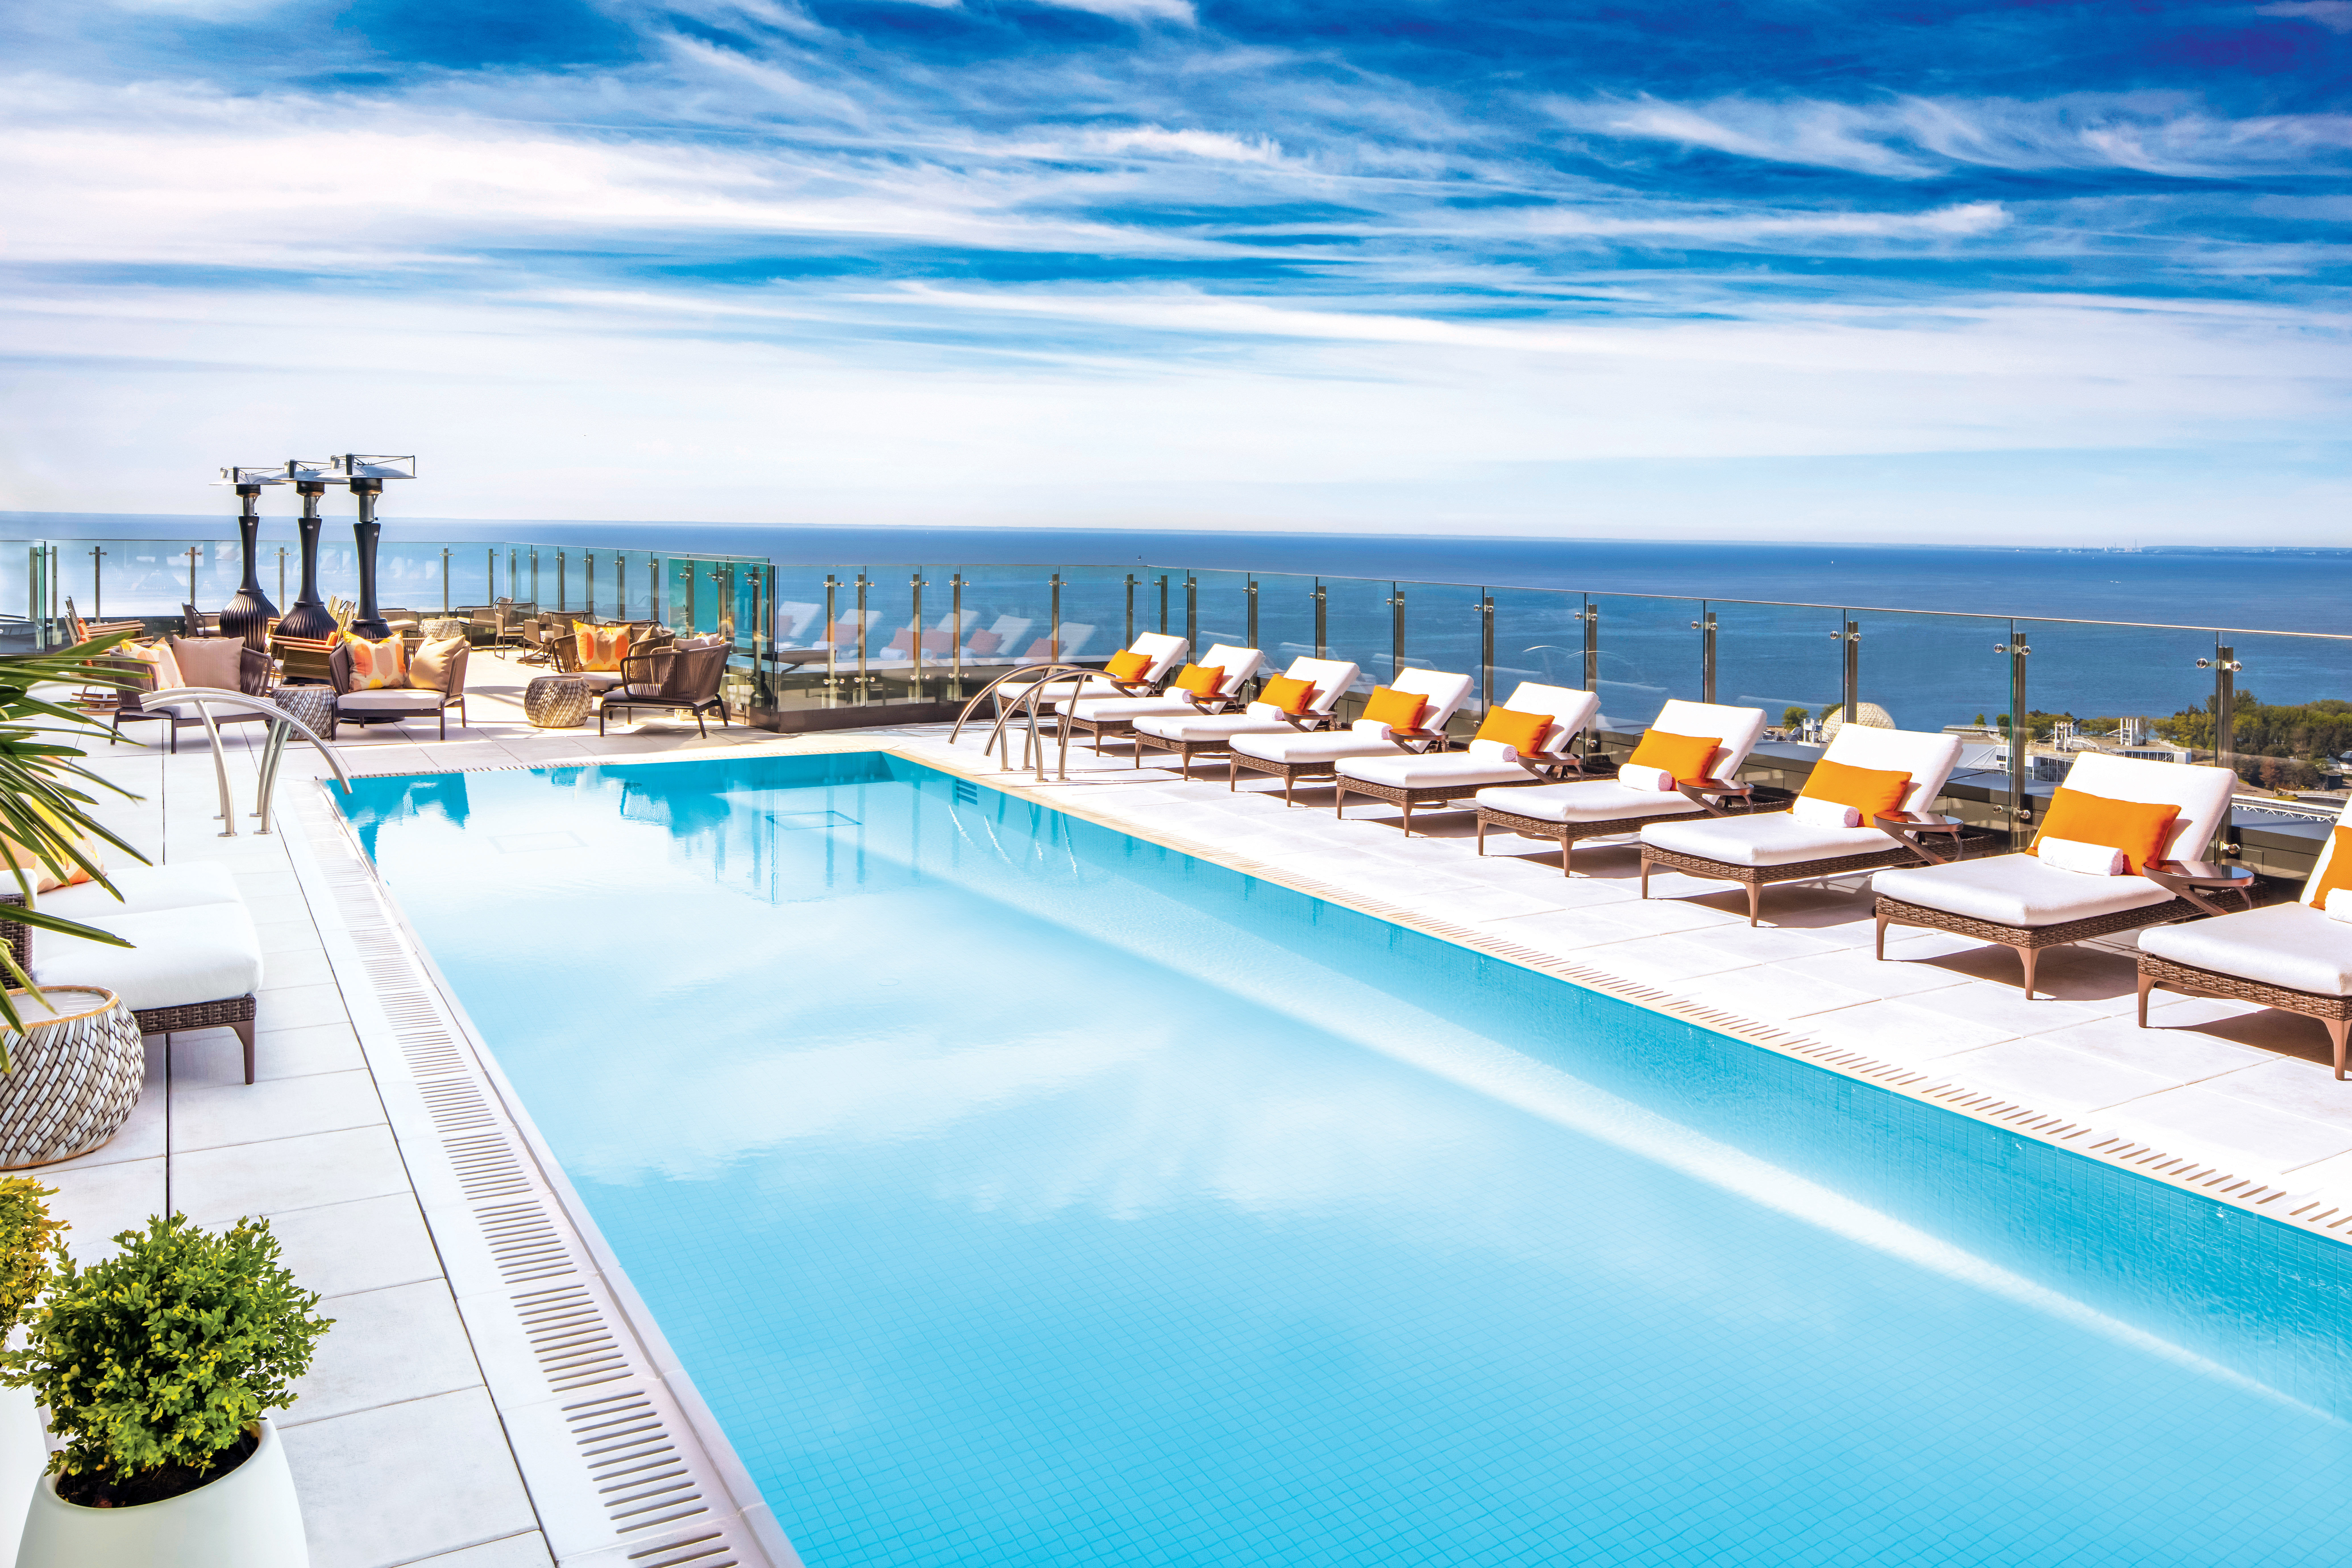 The Rooftop Pool of Hotel X